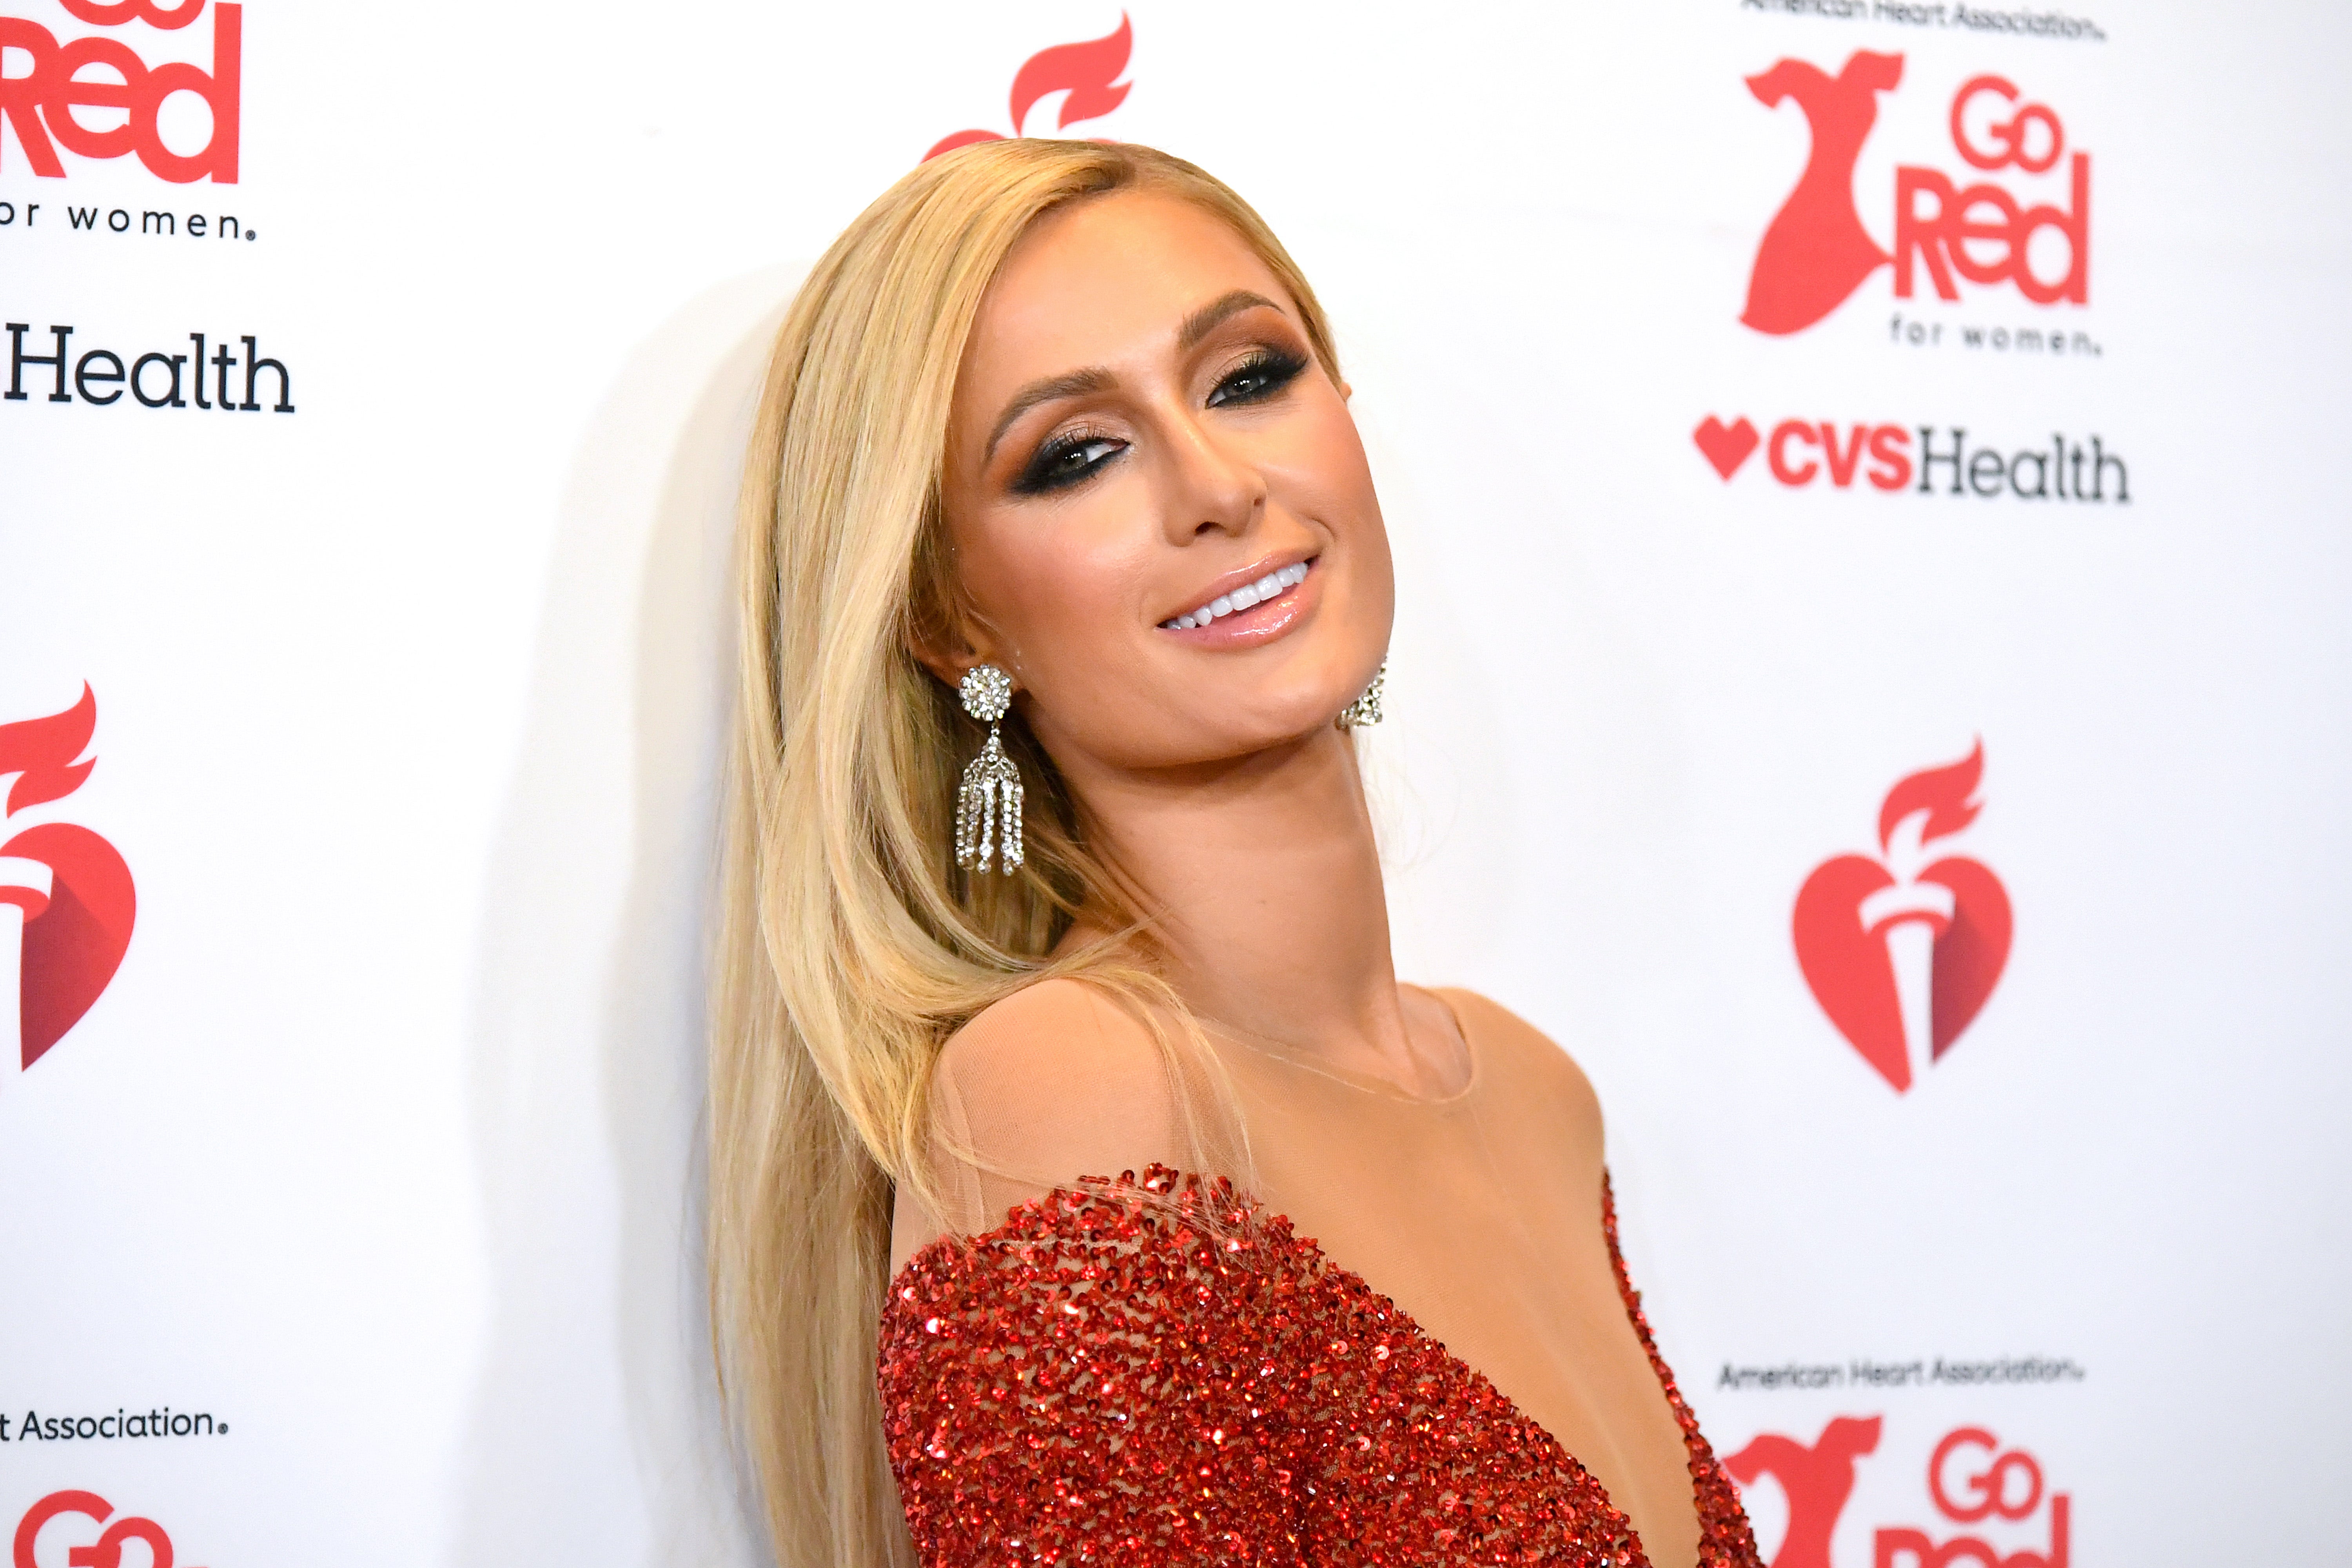 Paris Hilton blasts Roe v. Wade reversal after revealing she had an abortion in her 20s: 'It's mind-boggling'